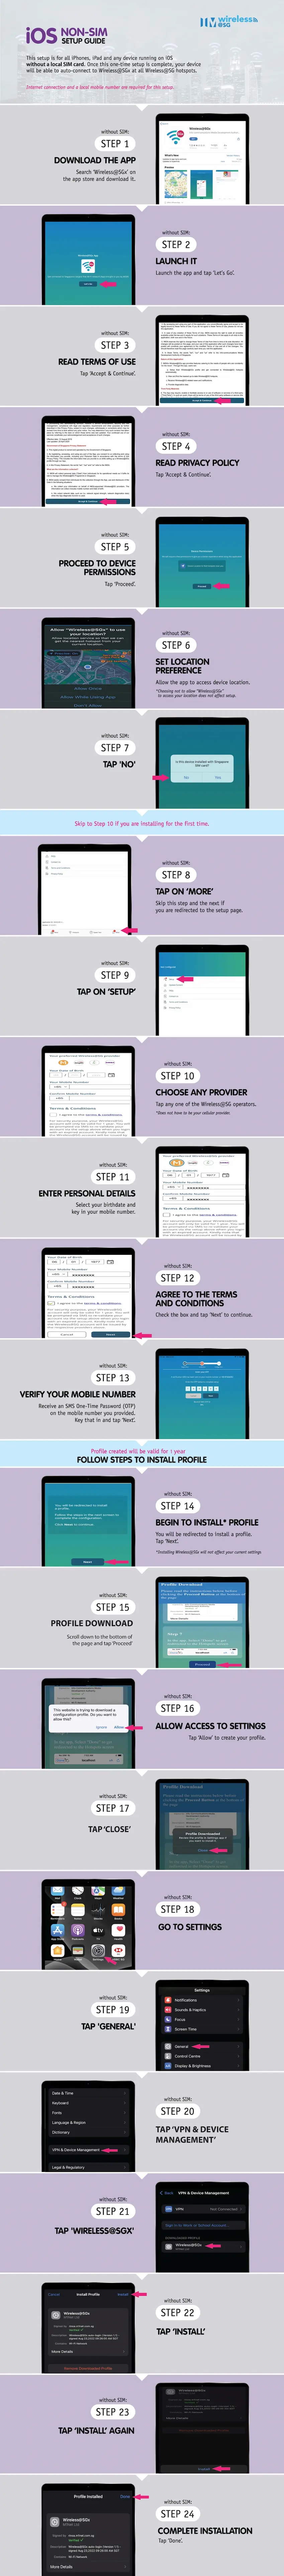 Wireless@SGx app step-by-step infographic setup guide for iOS Non-SIM